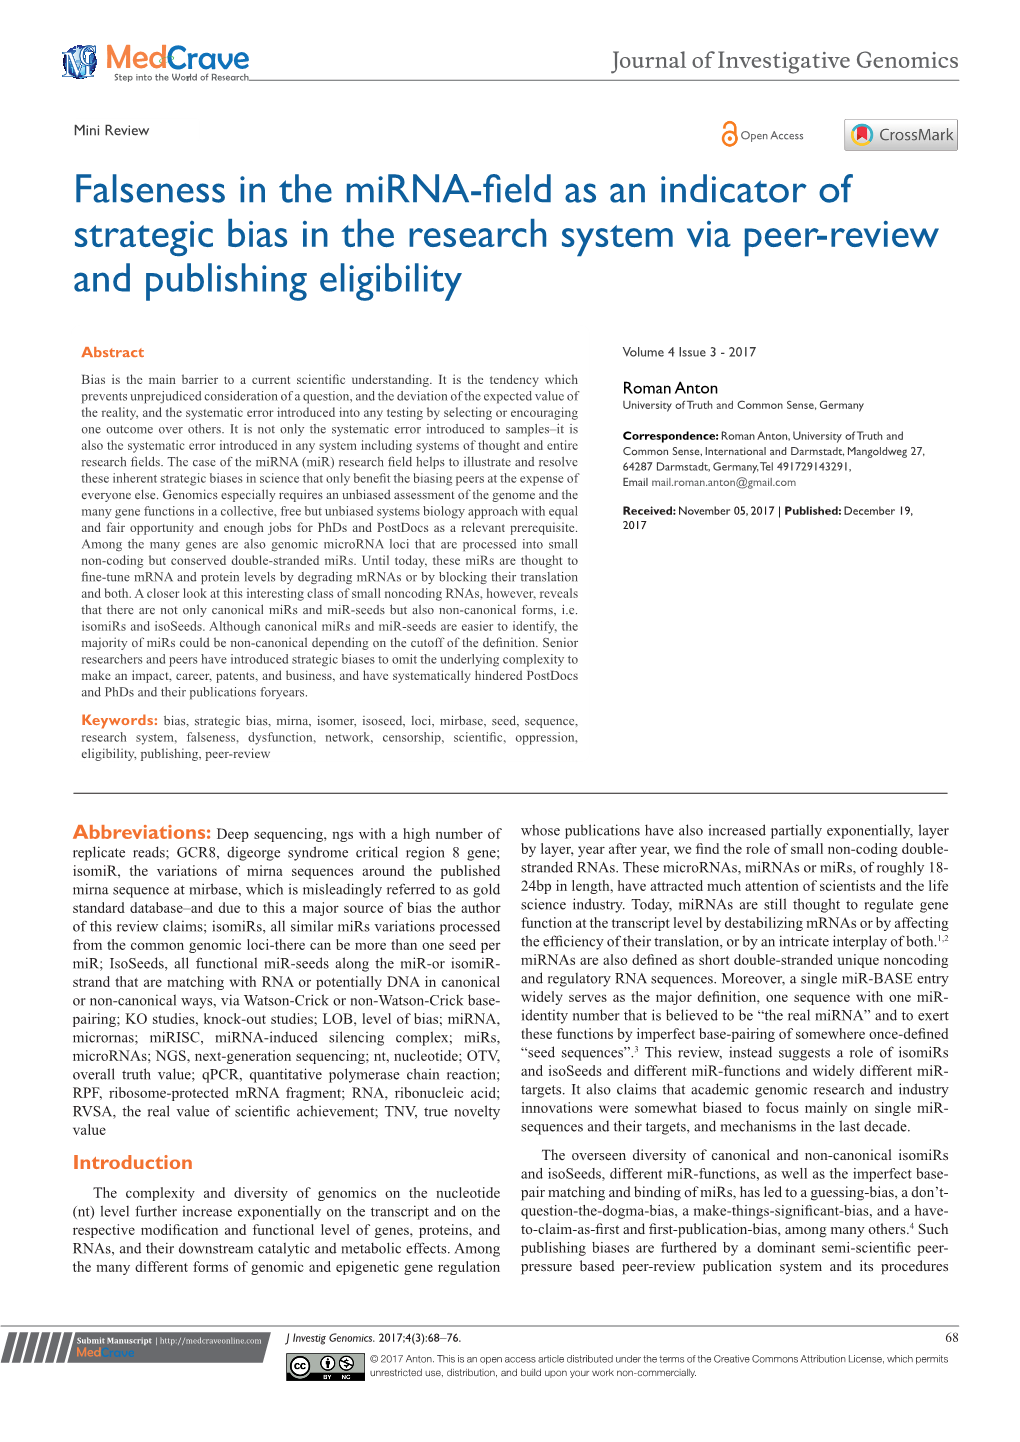 Falseness in the Mirna-Field As an Indicator of Strategic Bias in the Research System Via Peer-Review and Publishing Eligibility